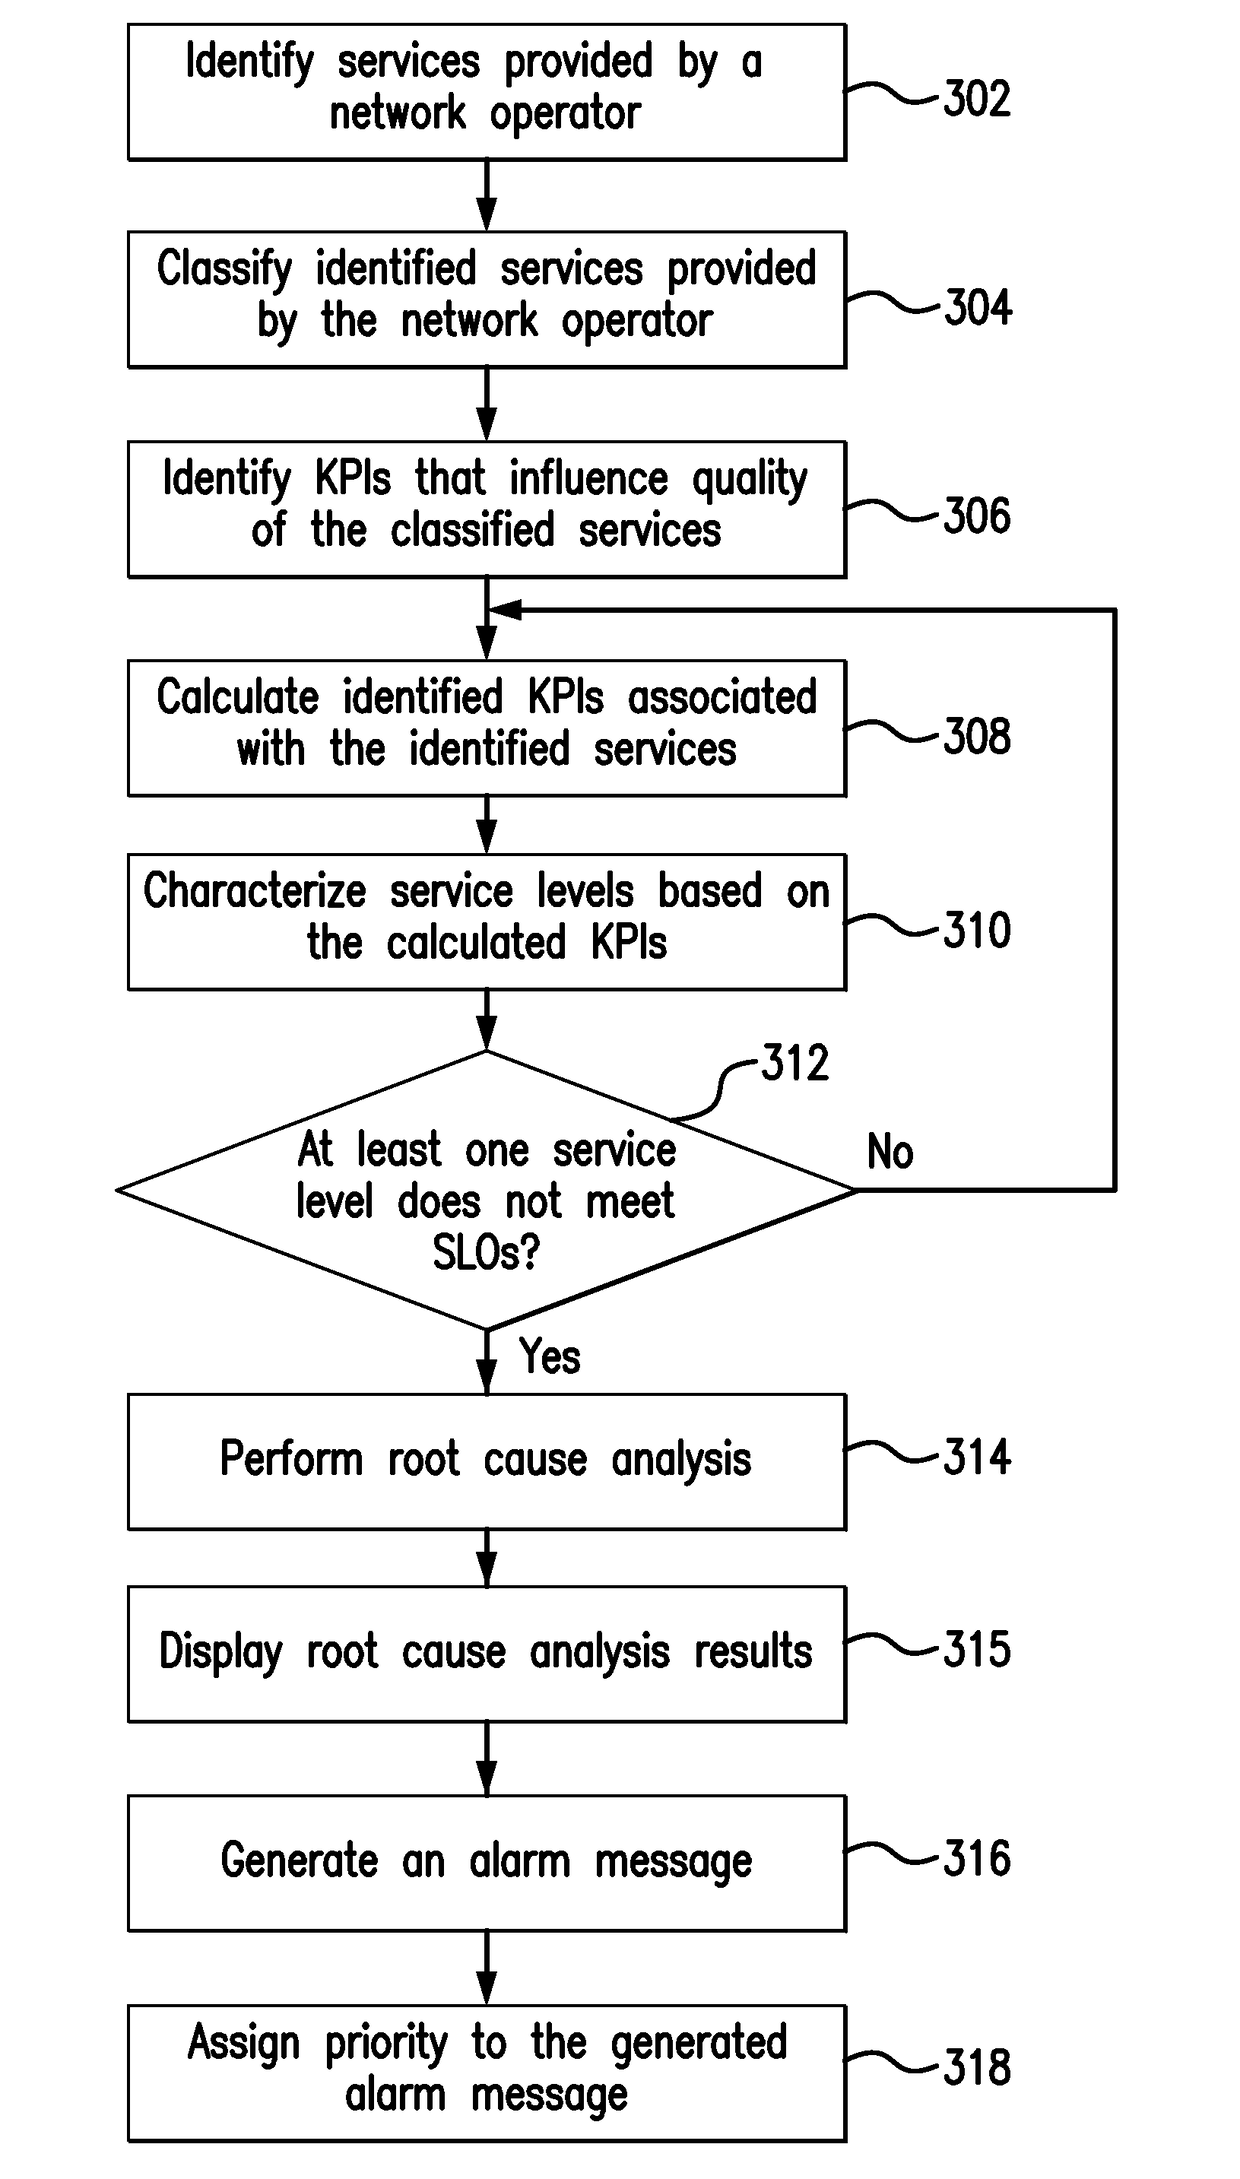 System and method for automatically identifying failure in services deployed by mobile network operators